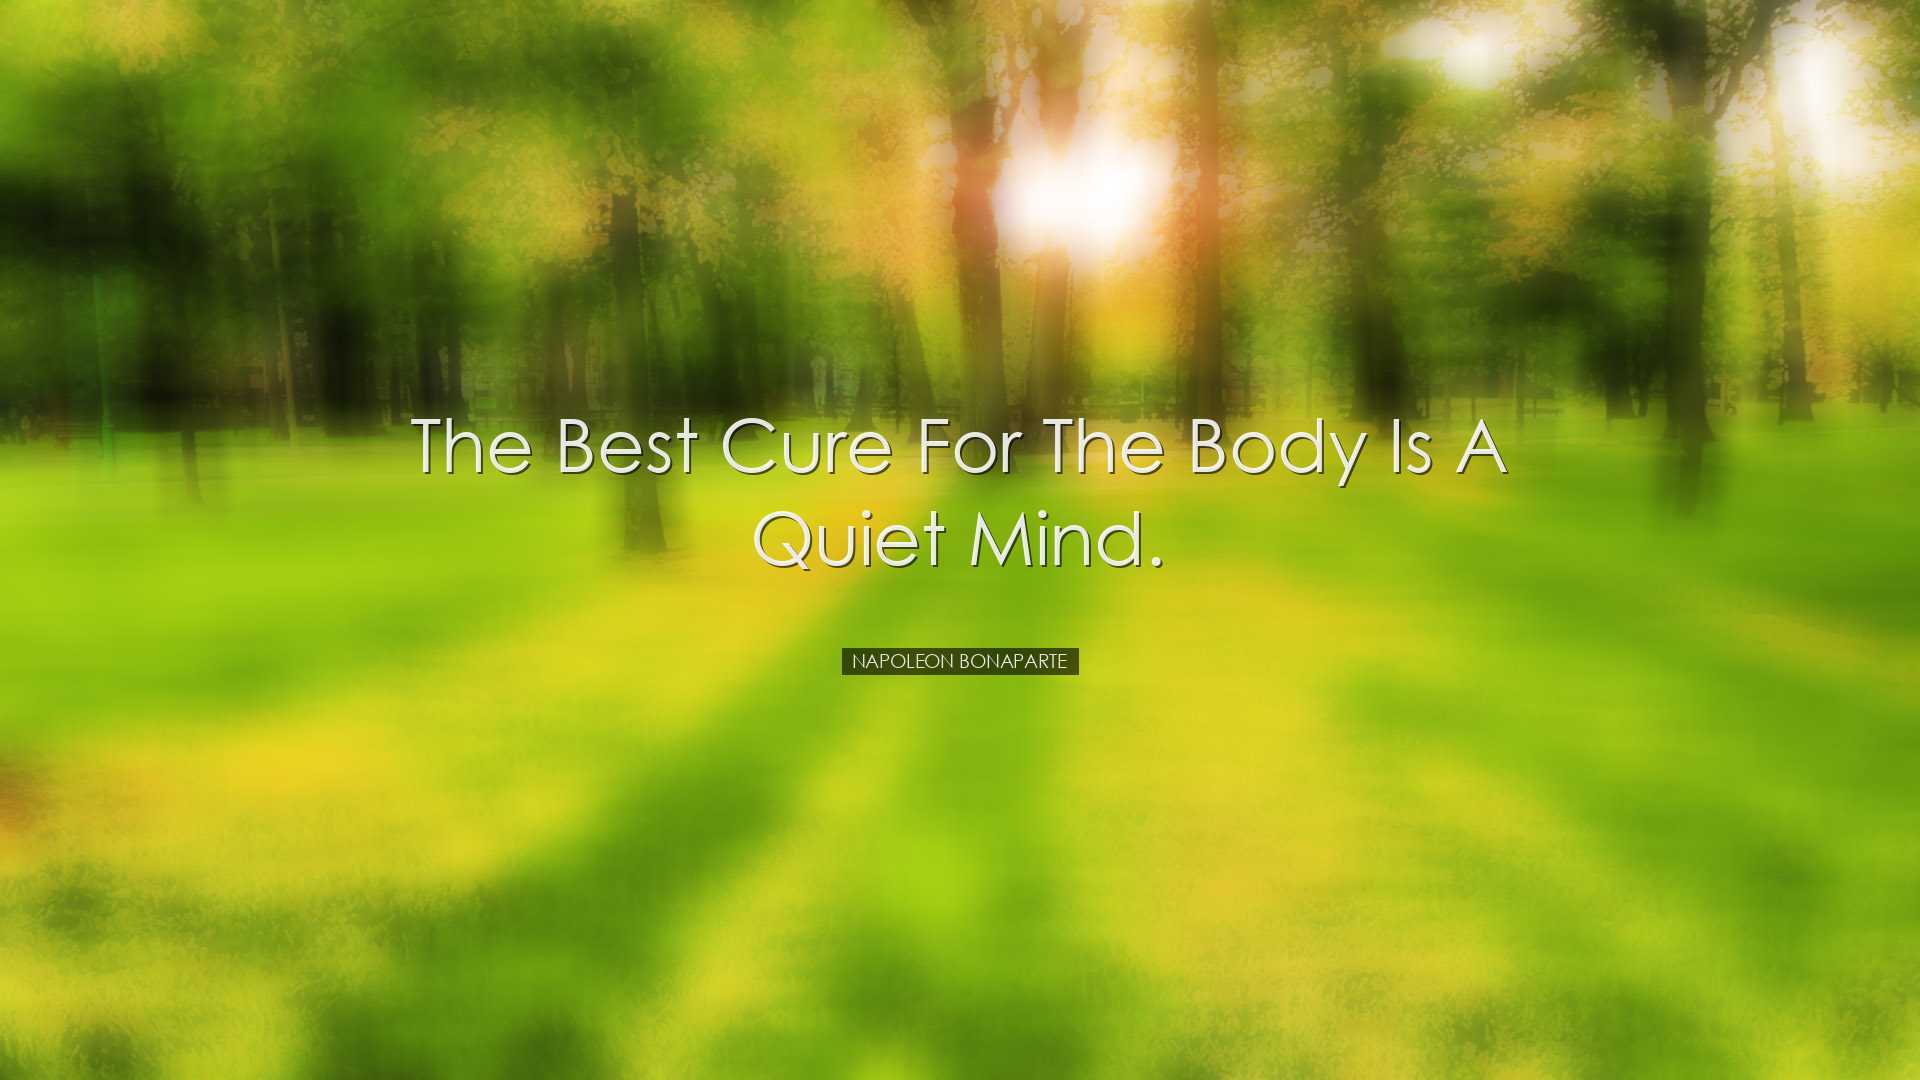 The best cure for the body is a quiet mind. - Napoleon Bonaparte